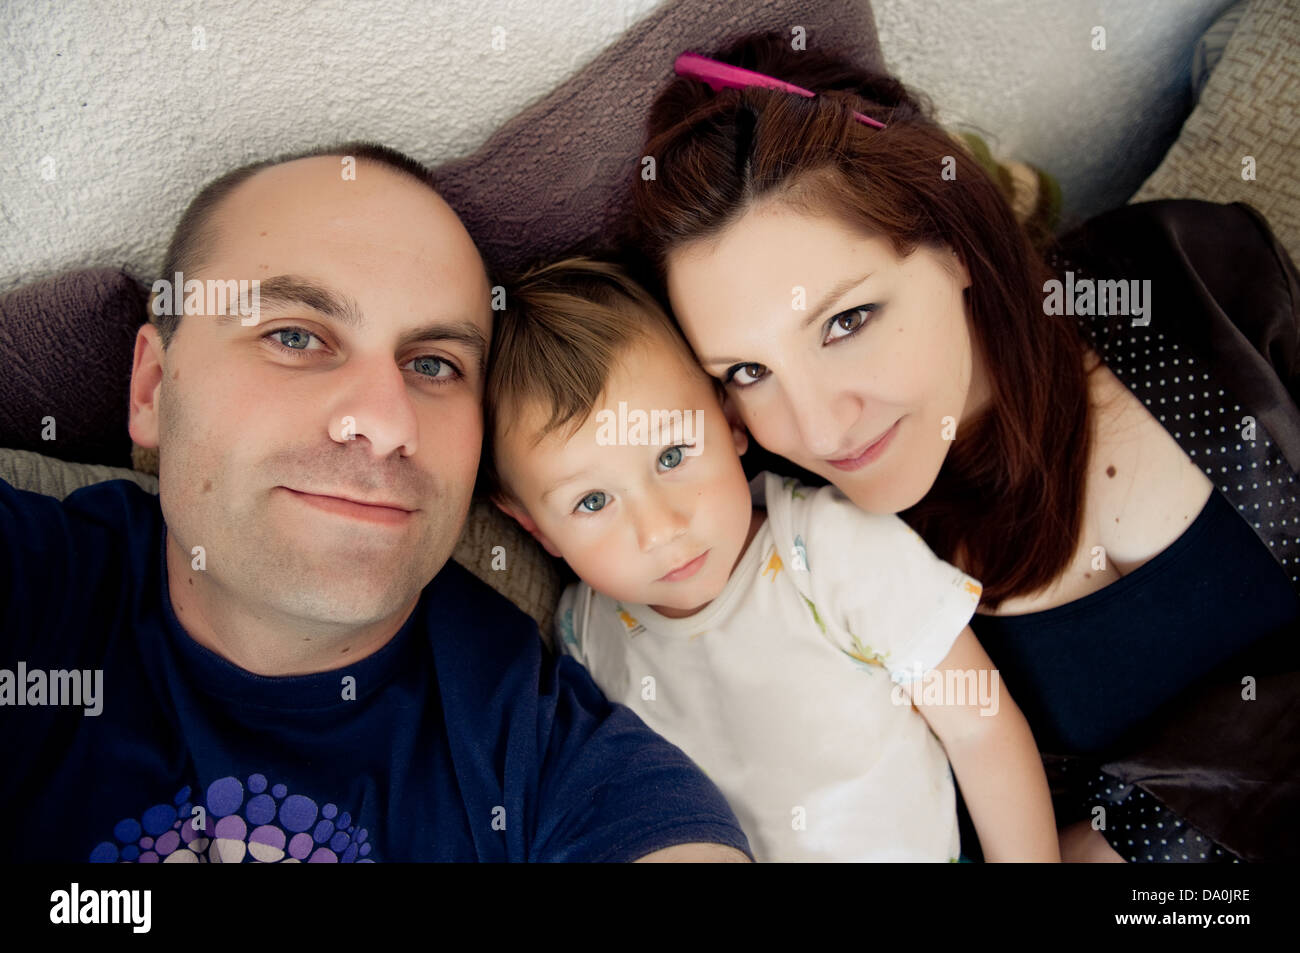 Self portrait photo of real family Stock Photo